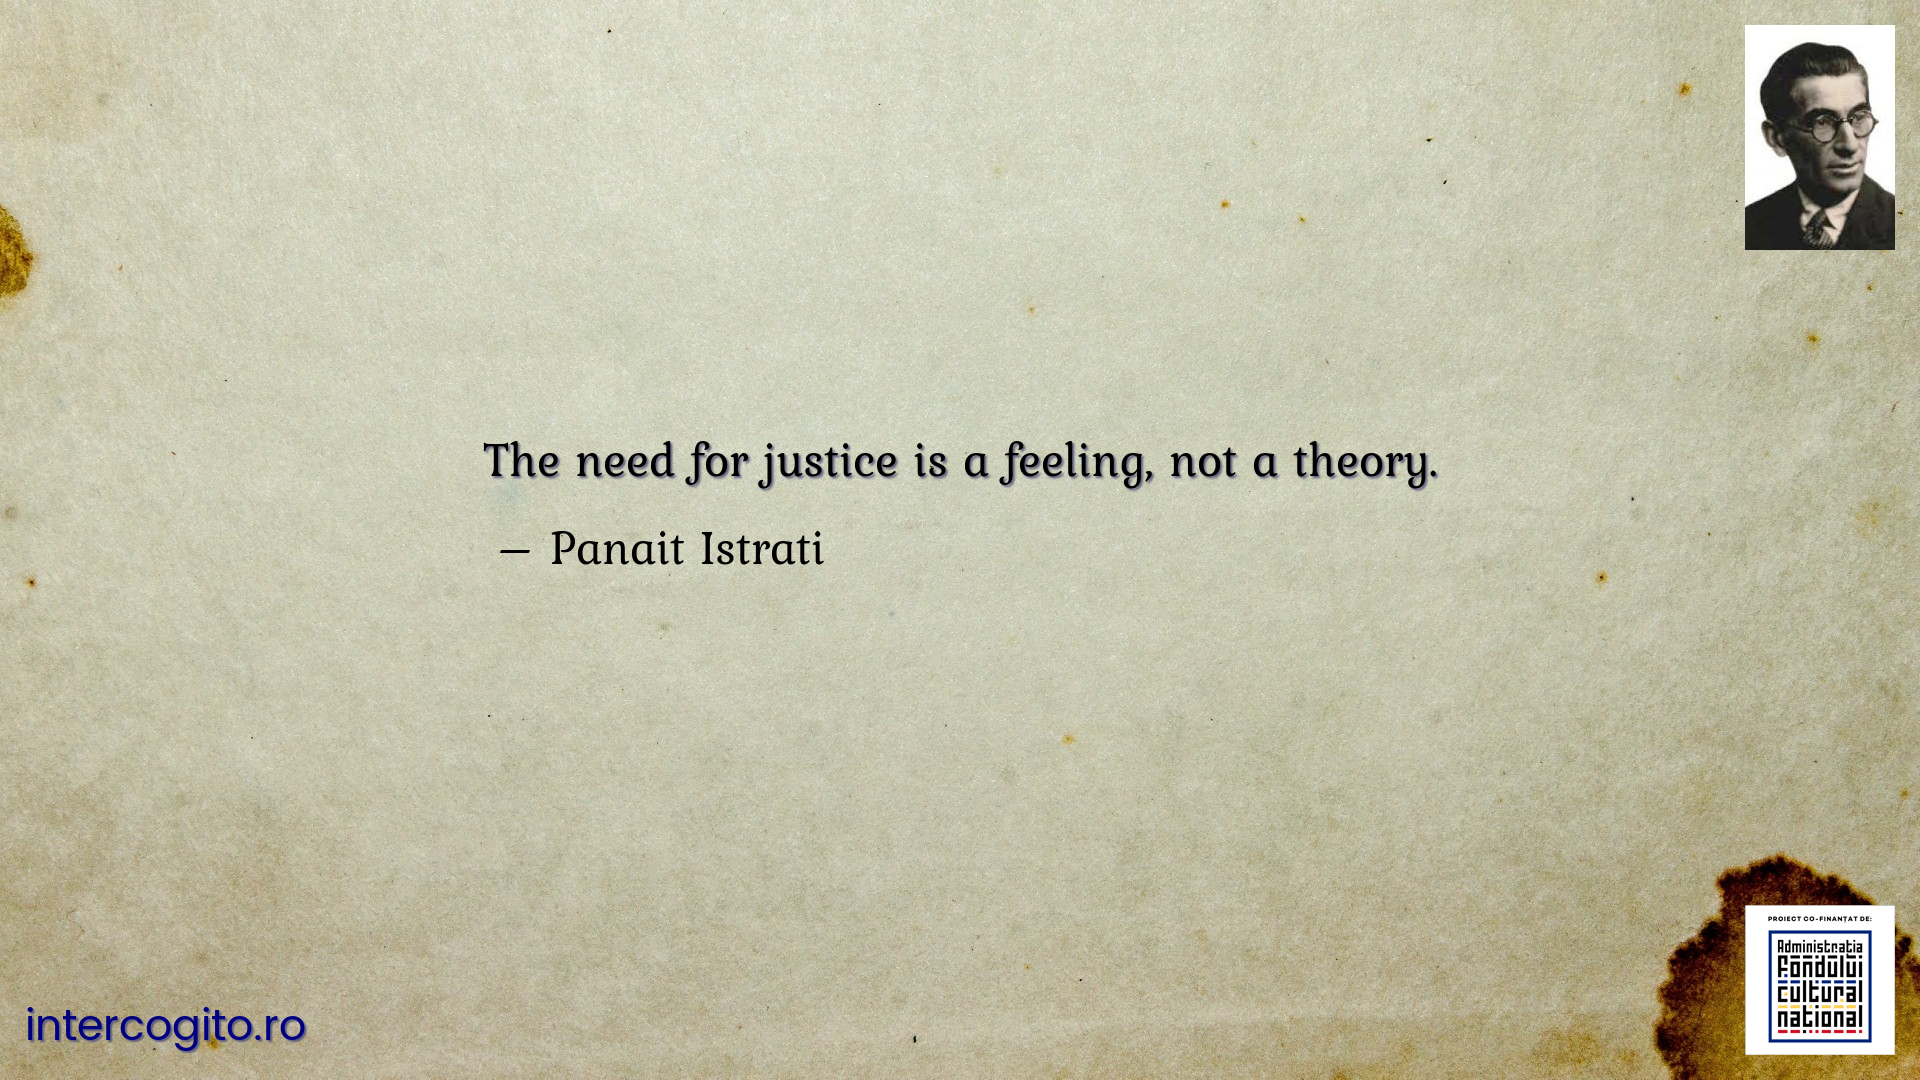 The need for justice is a feeling, not a theory.